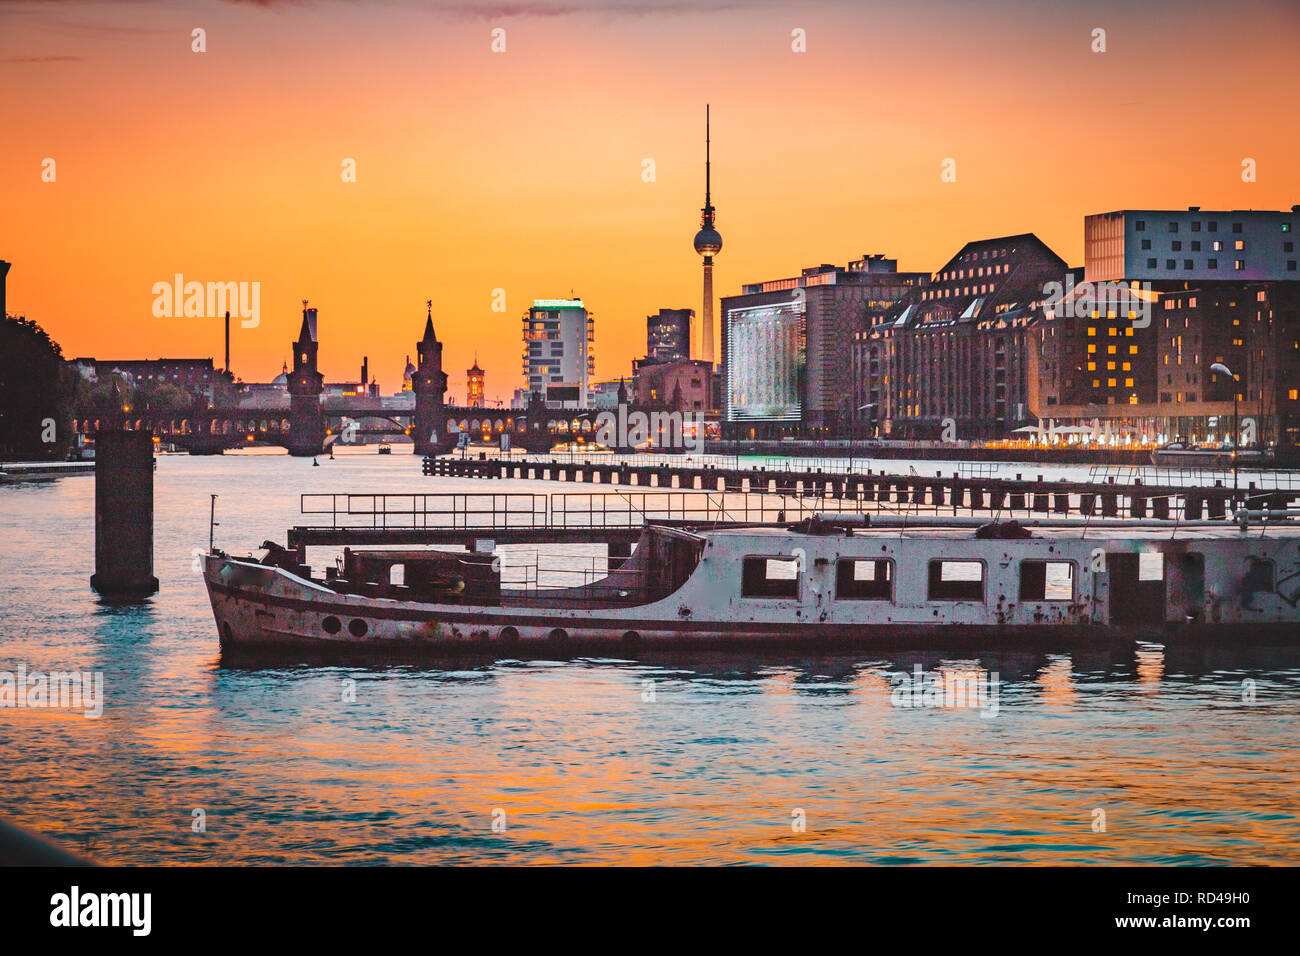 Panoramic view of Berlin skyline with famous TV tower and Oberbaum Bridge with old ship wreck lying in river Spree at dusk, Berlin, Germany Stock Photo